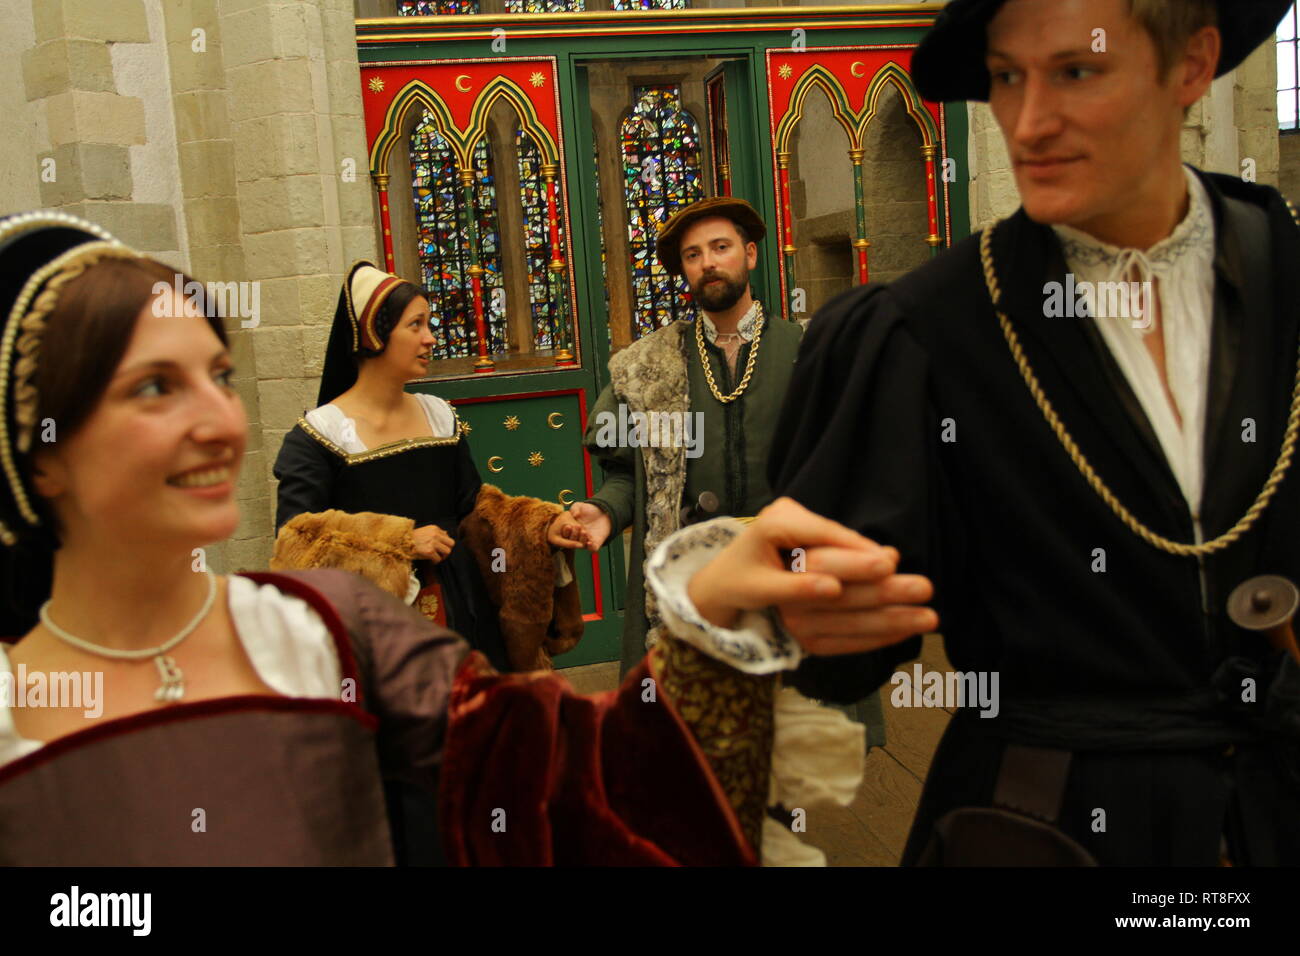 Anne Boleyn and Tudor friends dance together at The Tower of London- they are dressed in fine clothes Stock Photo